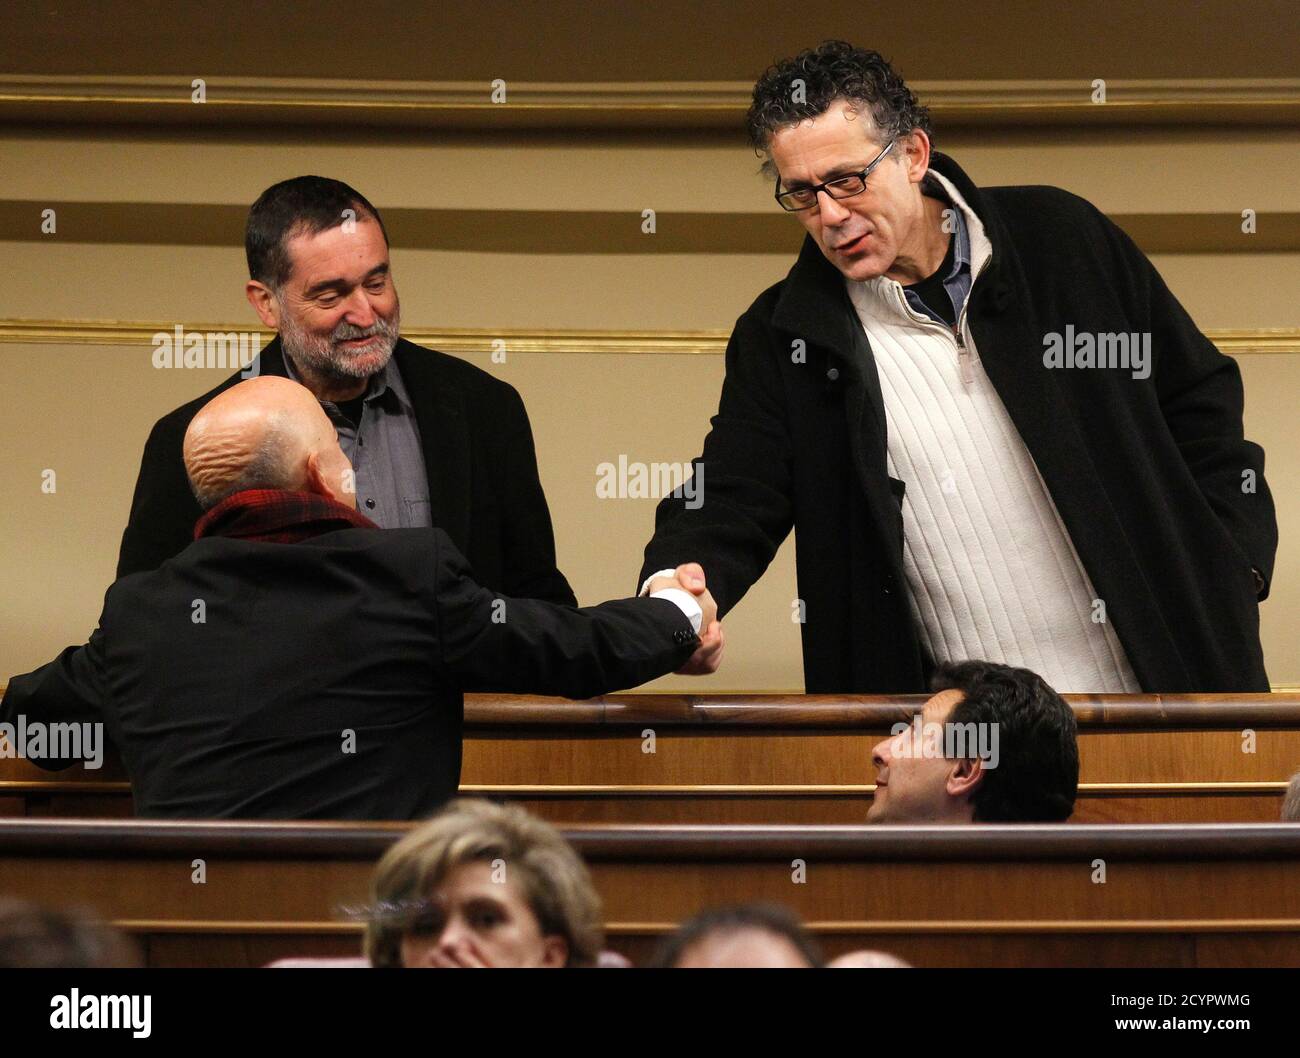 Inaki Antiguedad and Xabier Errekondo (R), congressmen of pro-Basque independence coalition Amaiur, greet former San Sebastian major and Basque Socialist congressman Odon Elorza (L) before the forming of the new parliament at the Spanish parliament in Madrid December 13, 2011. People's Party (Partido Popular) leader and Spain's incoming Prime Minister Mariano Rajoy has said that he does not intend to include Amaiur in a round of meetings with opposition parties unless they condemn the actions of armed Basque separatists ETA. REUTERS/Andrea Comas(SPAIN - Tags: POLITICS) Stock Photo